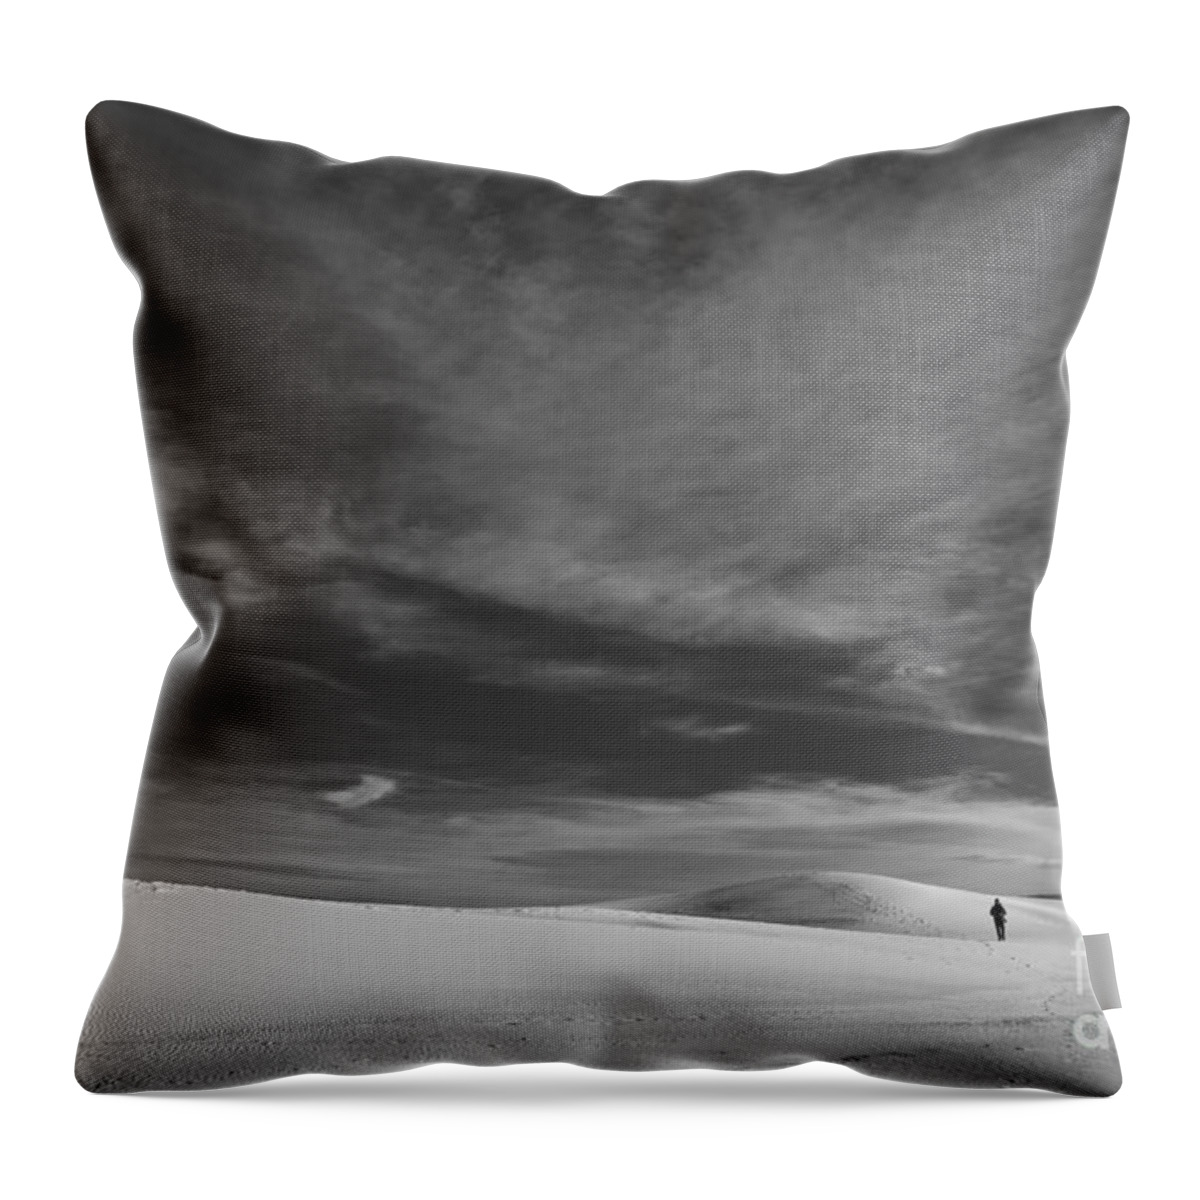 White Sand Throw Pillow featuring the photograph Loneliness by Olivier Steiner